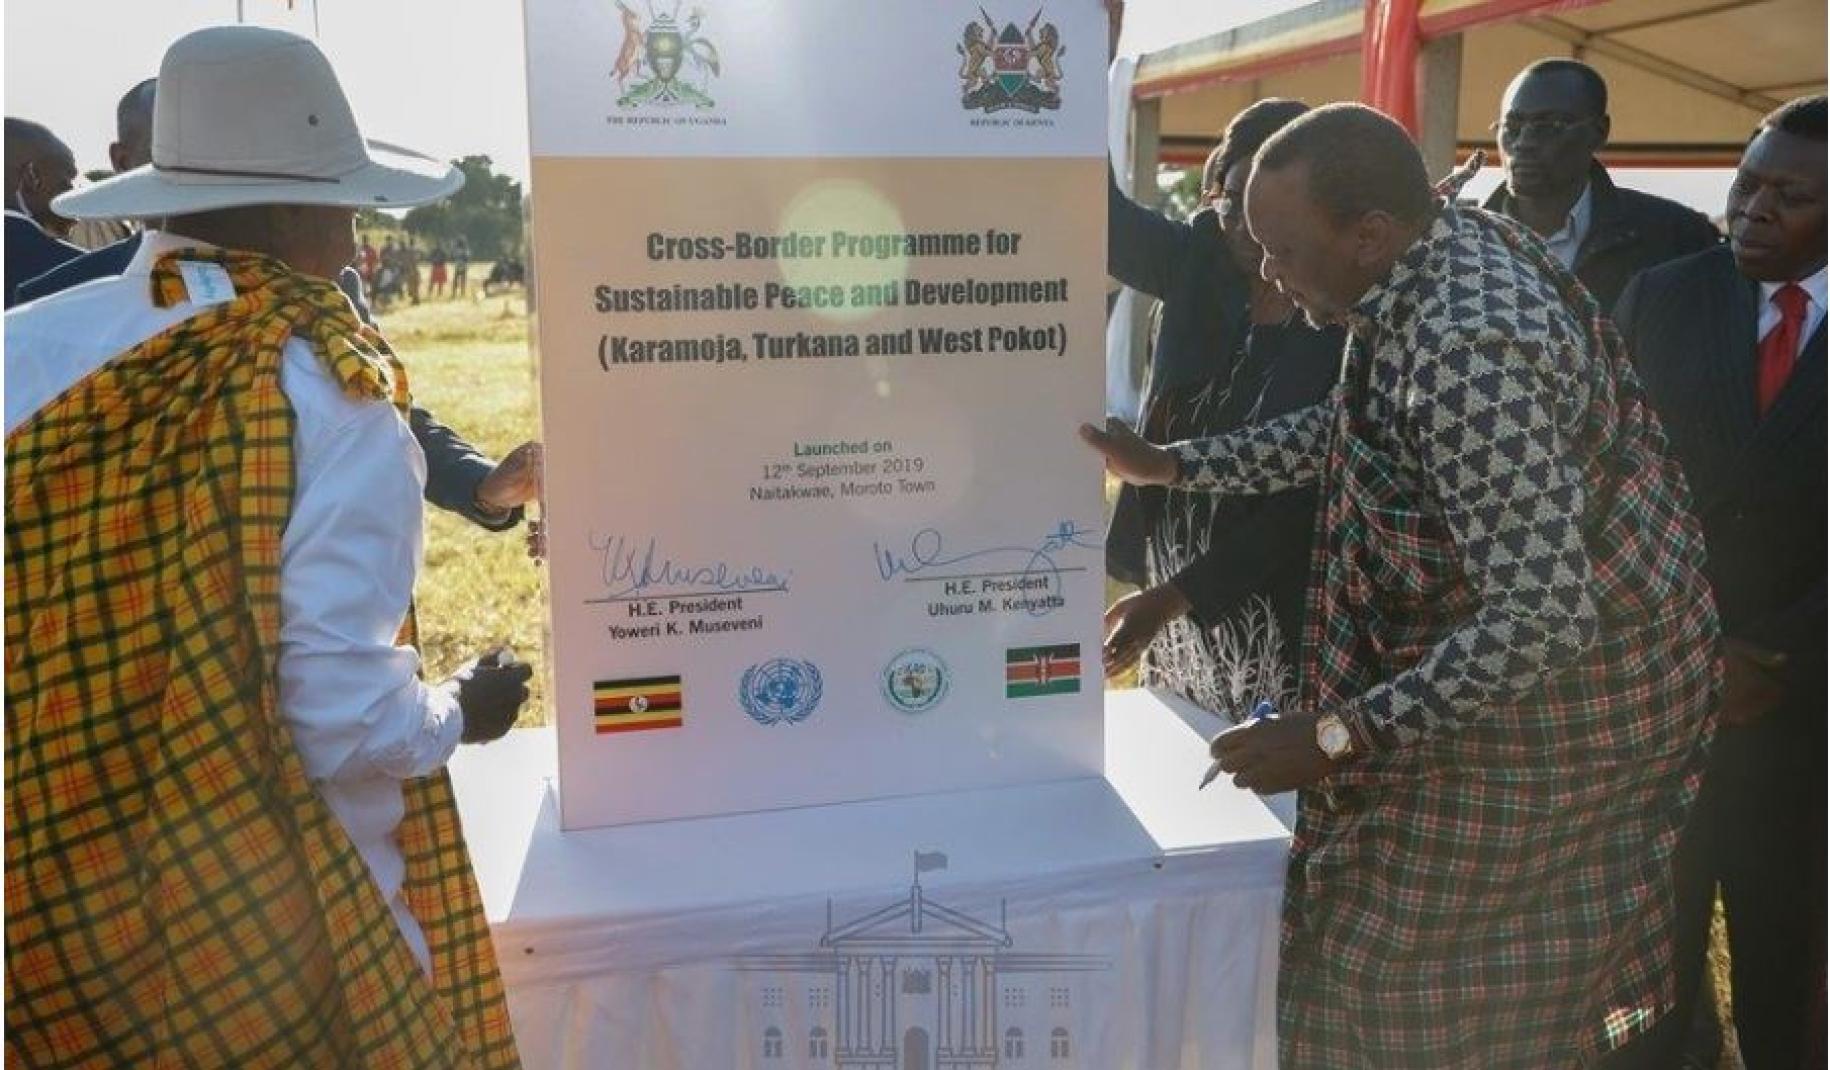 The two country presidents (Kenya and Uganda) are shown signing a signage demonstrating their collaboration.